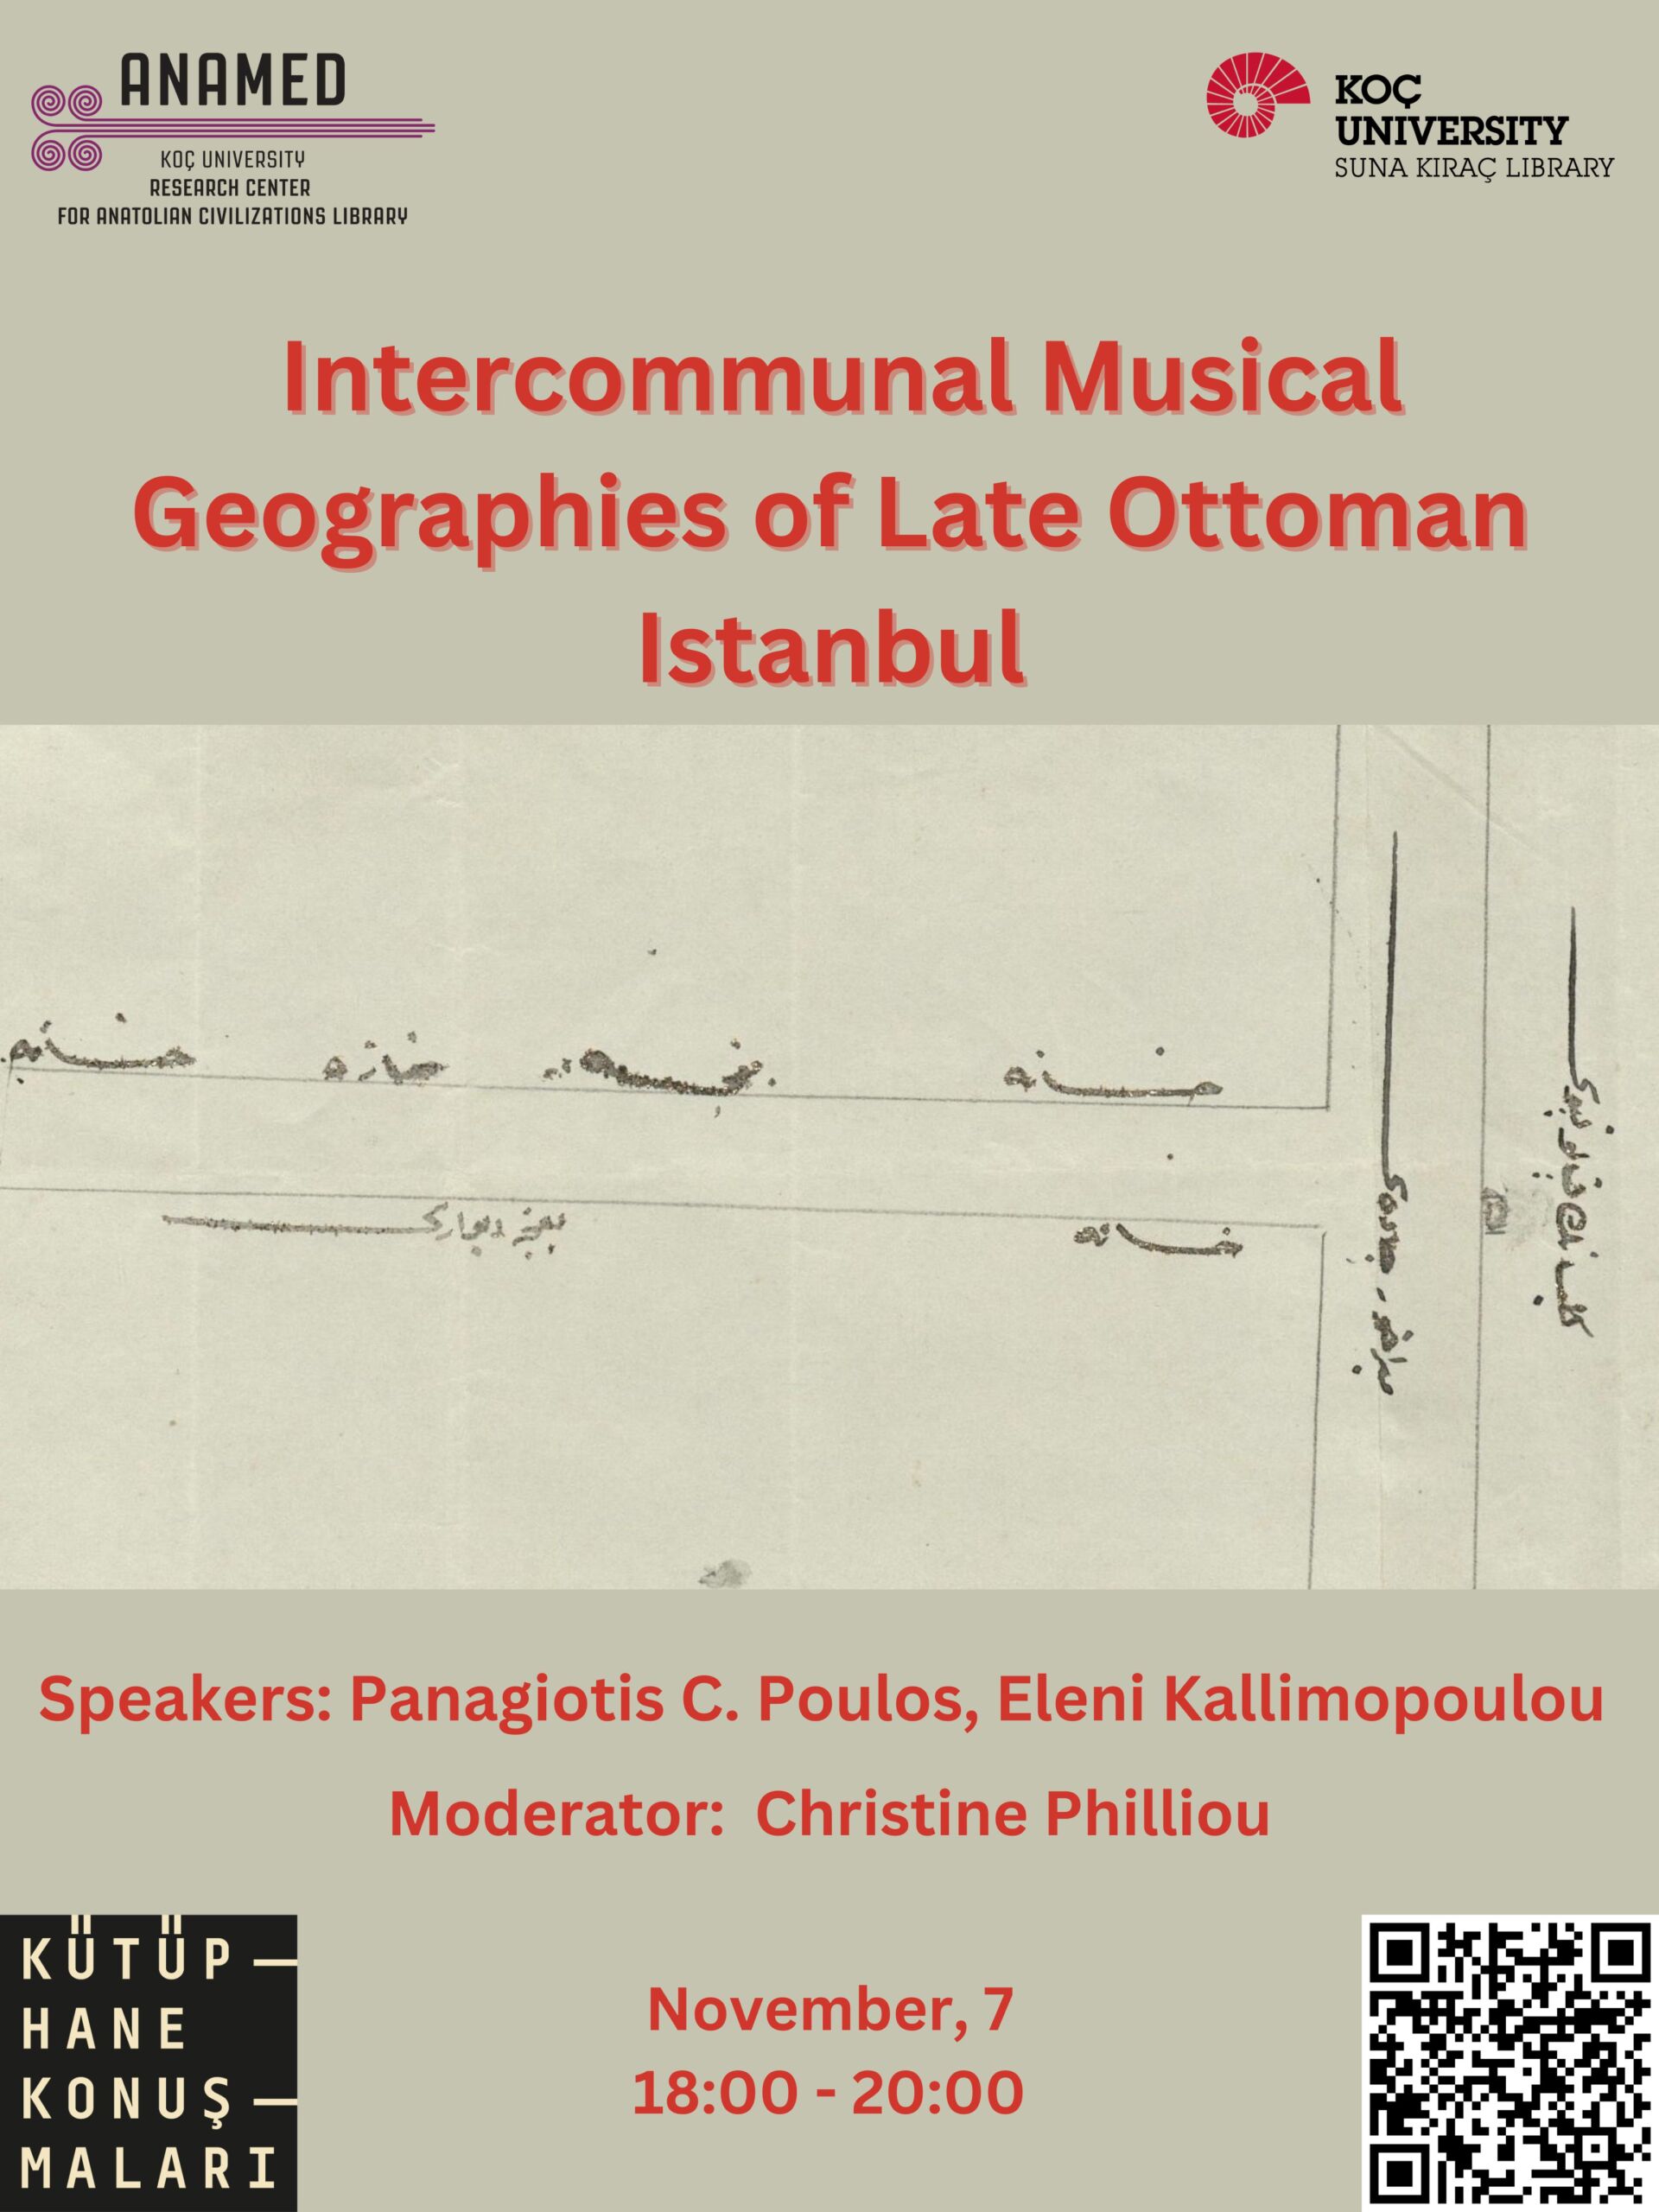 Intercommunal Musical Geographies of Late Ottoman Istanbul